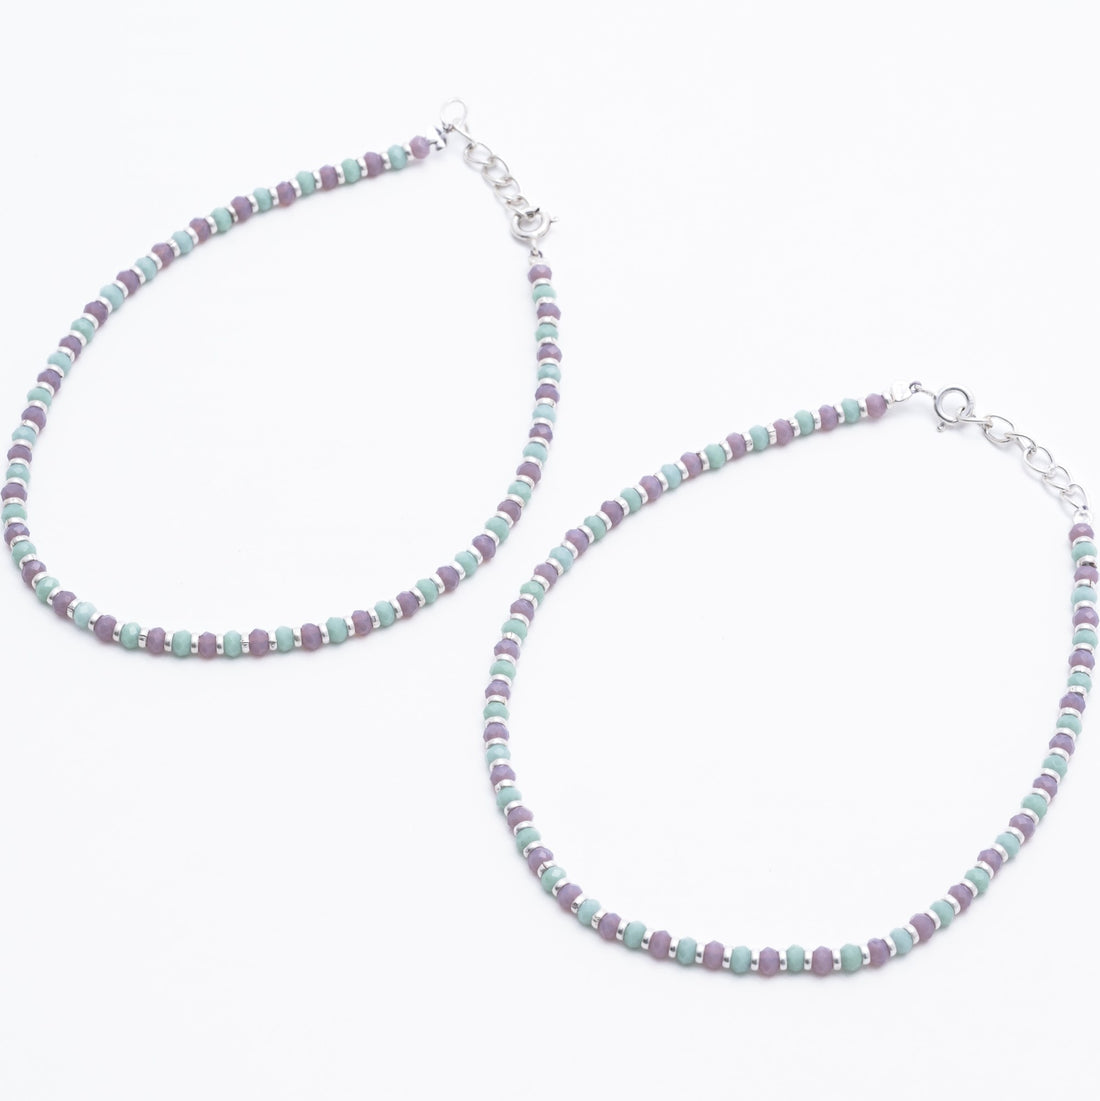 Pastel-colored silver Anklets for women